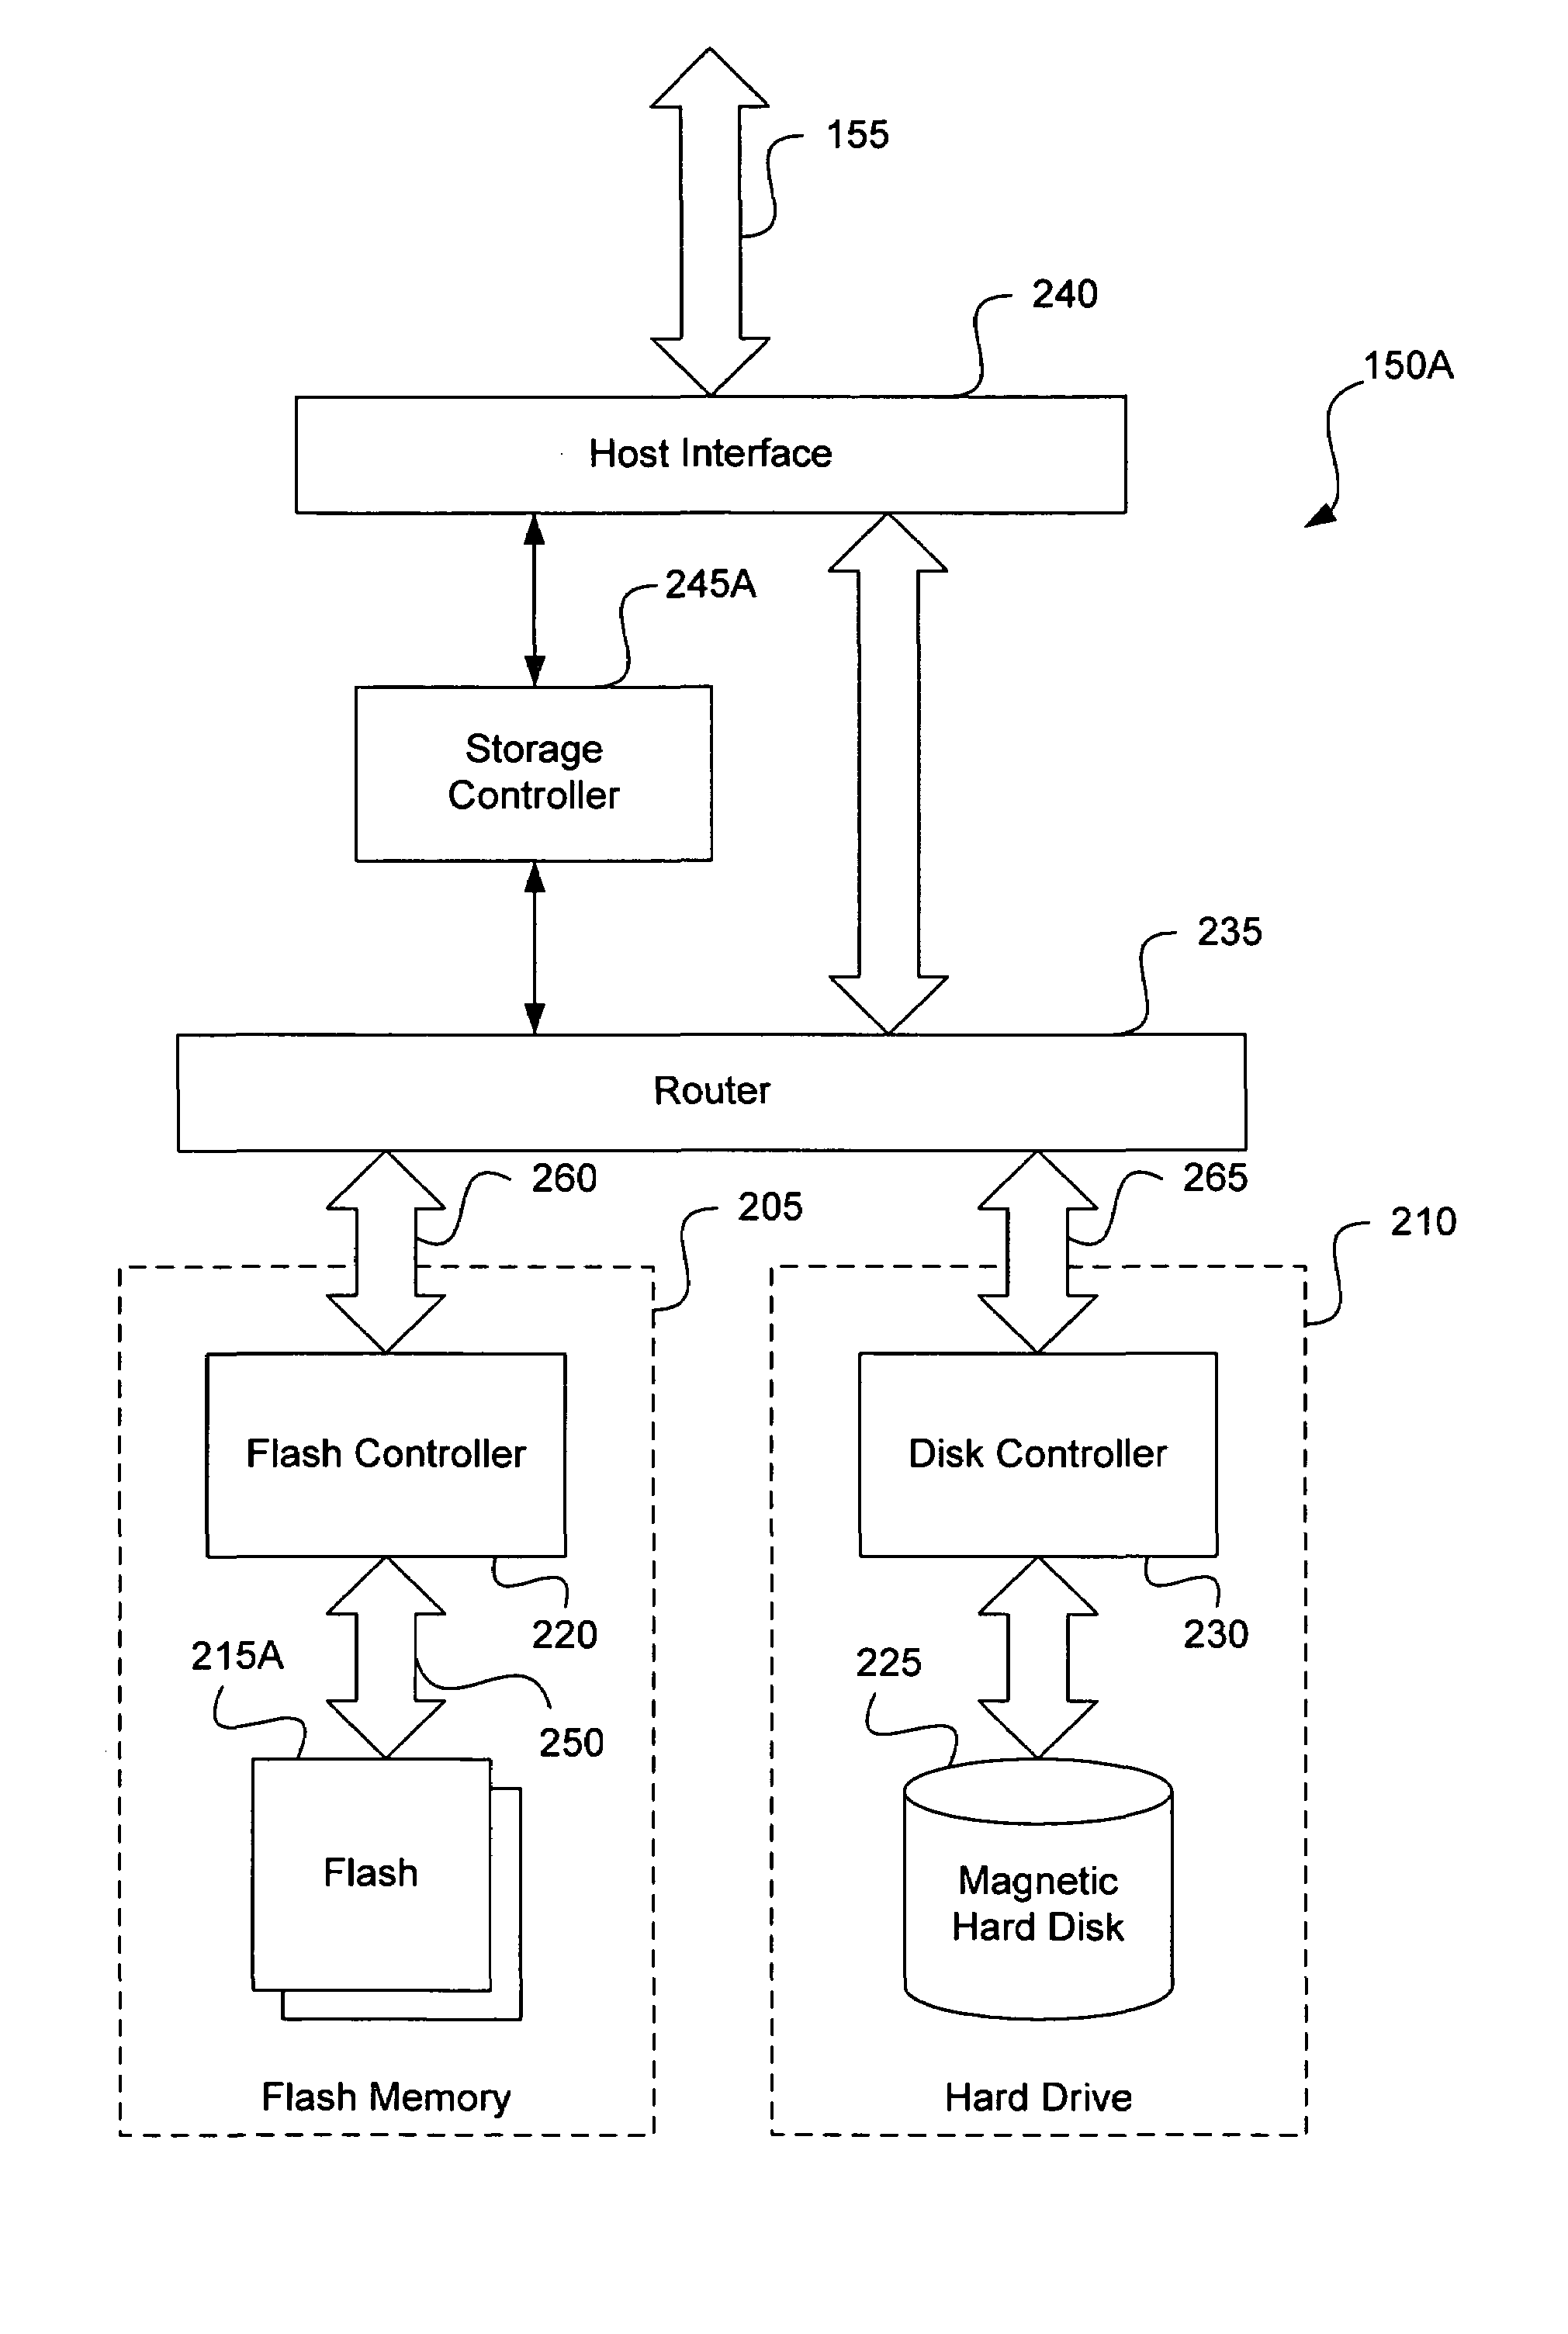 Disk acceleration using first and second storage devices